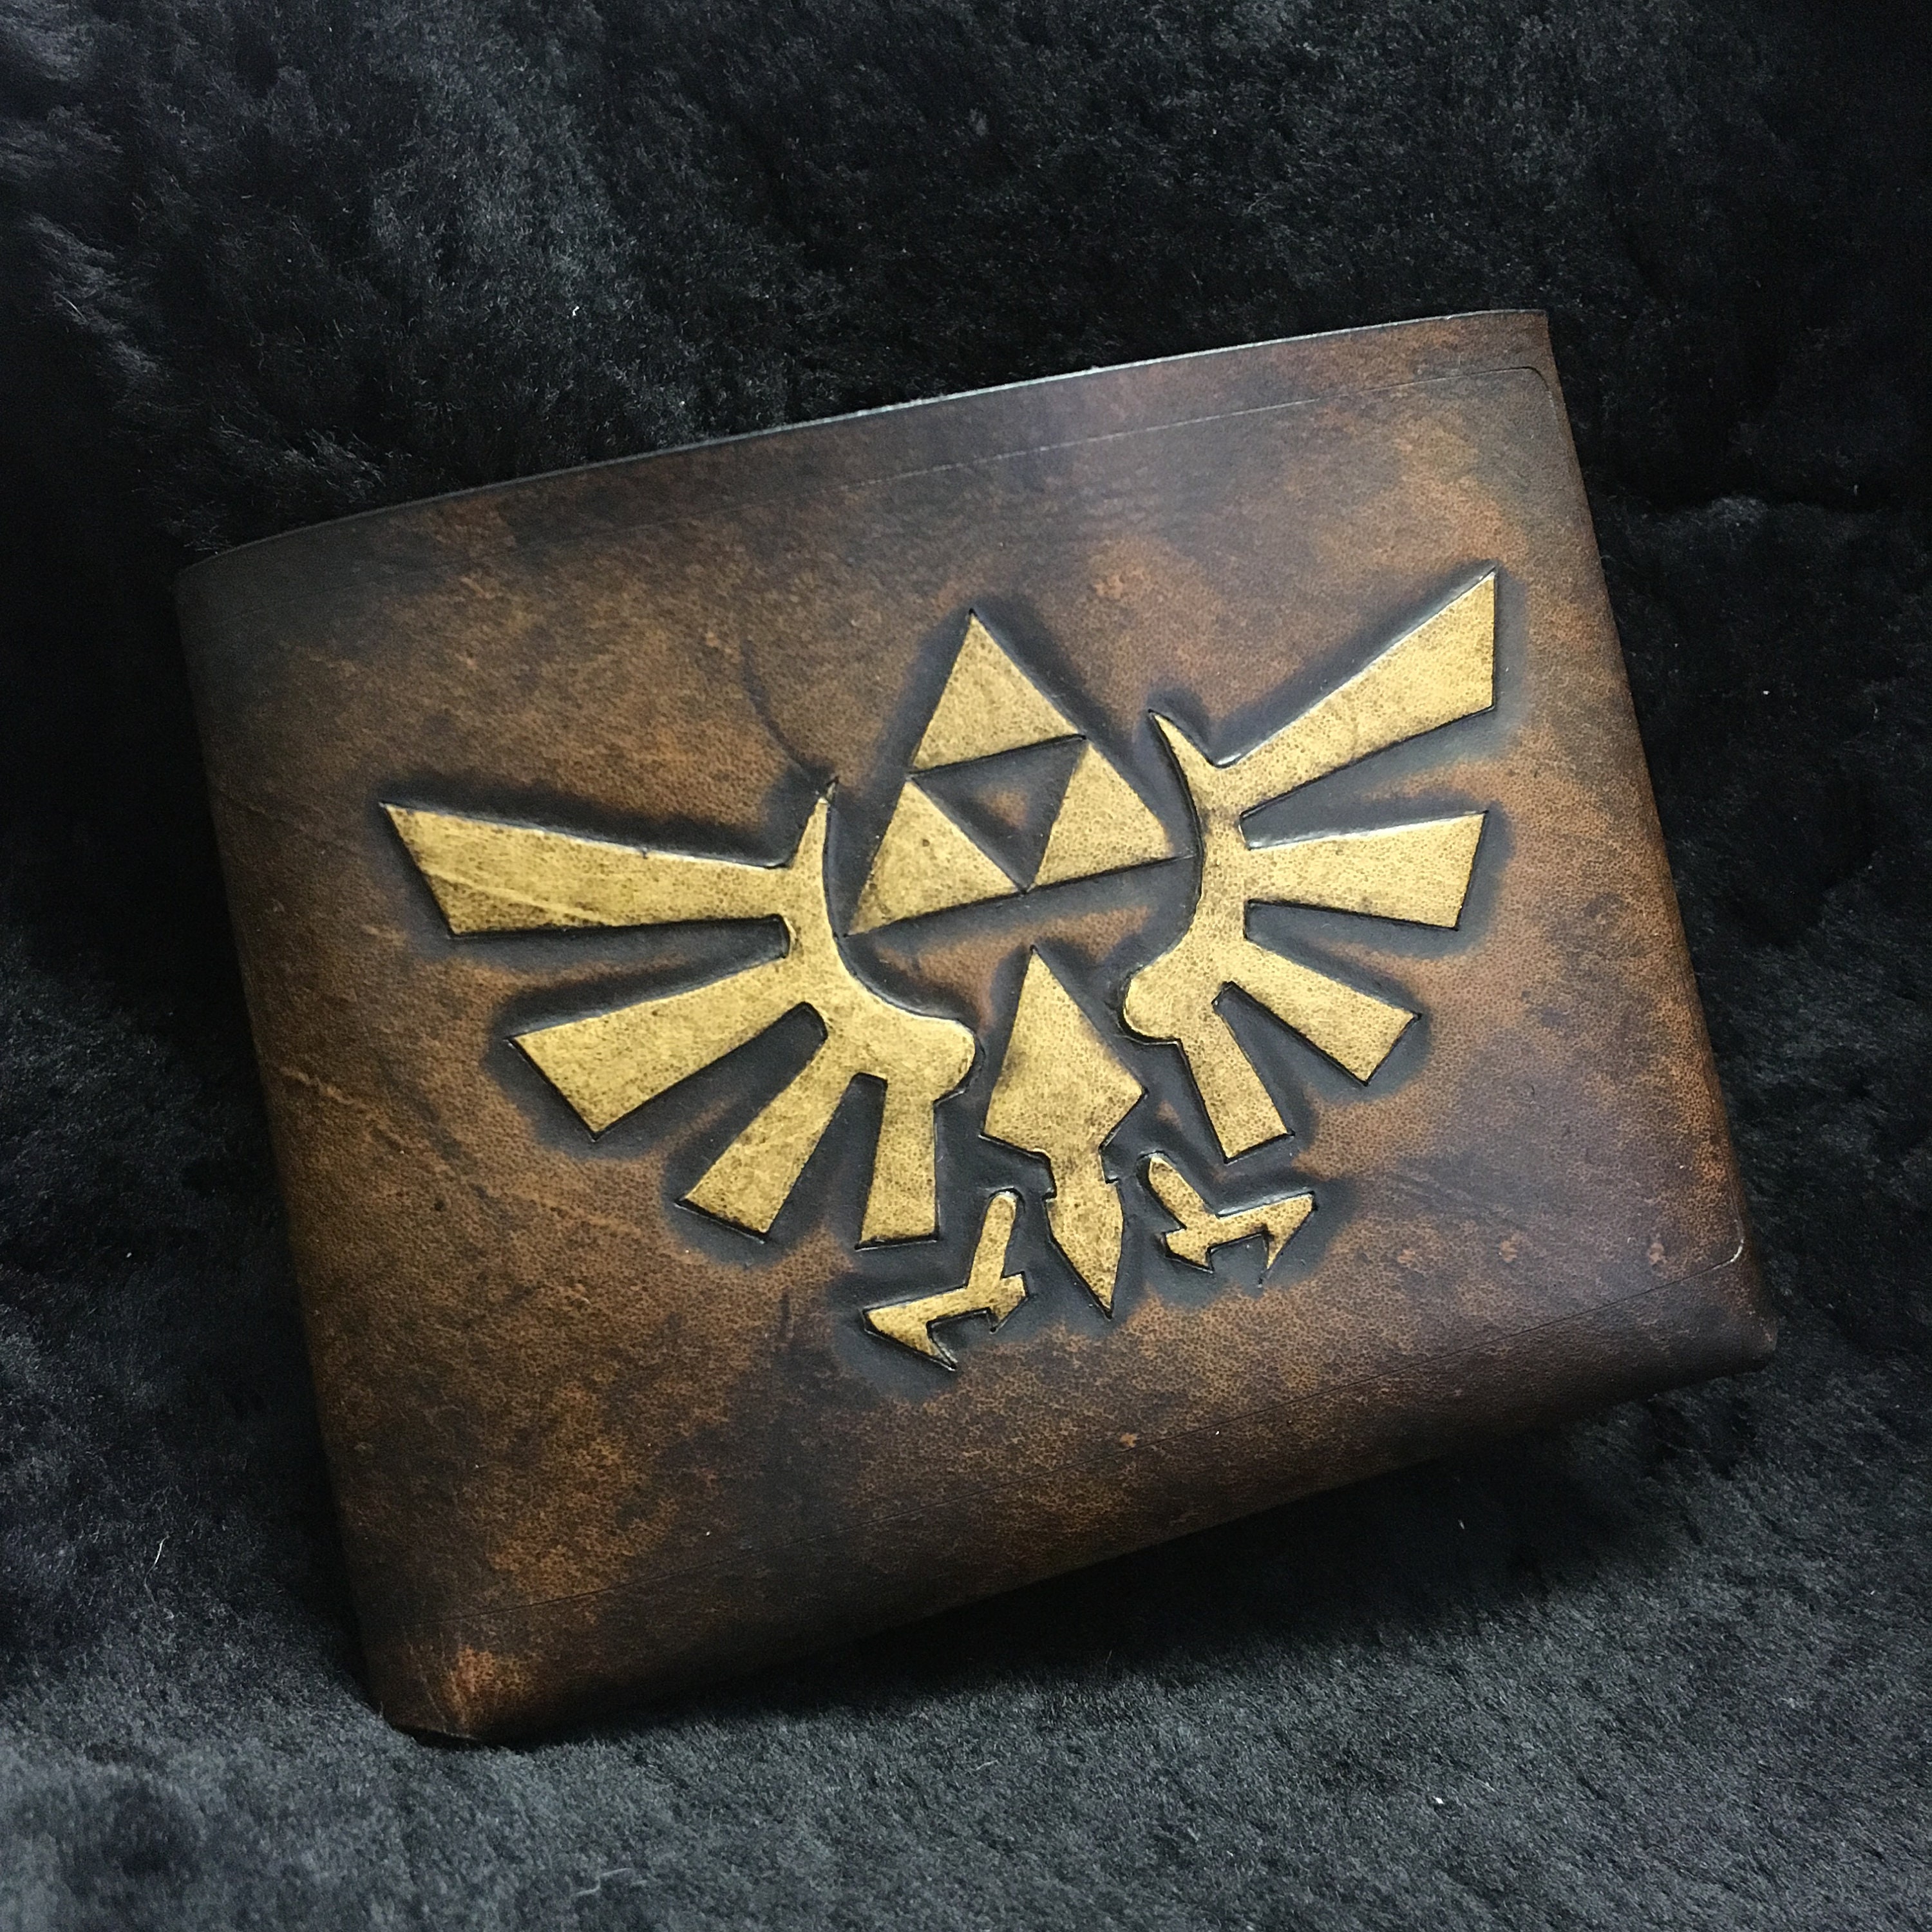  Men's 3D Genuine Leather Wallet, Hand-Carved, Hand-Painted,  Leather Carving, Custom wallet, Personalized wallet, Triforce and Holy  Relics, Legend of Zelda, Ocarina of Time Spiritual Stones : Handmade  Products